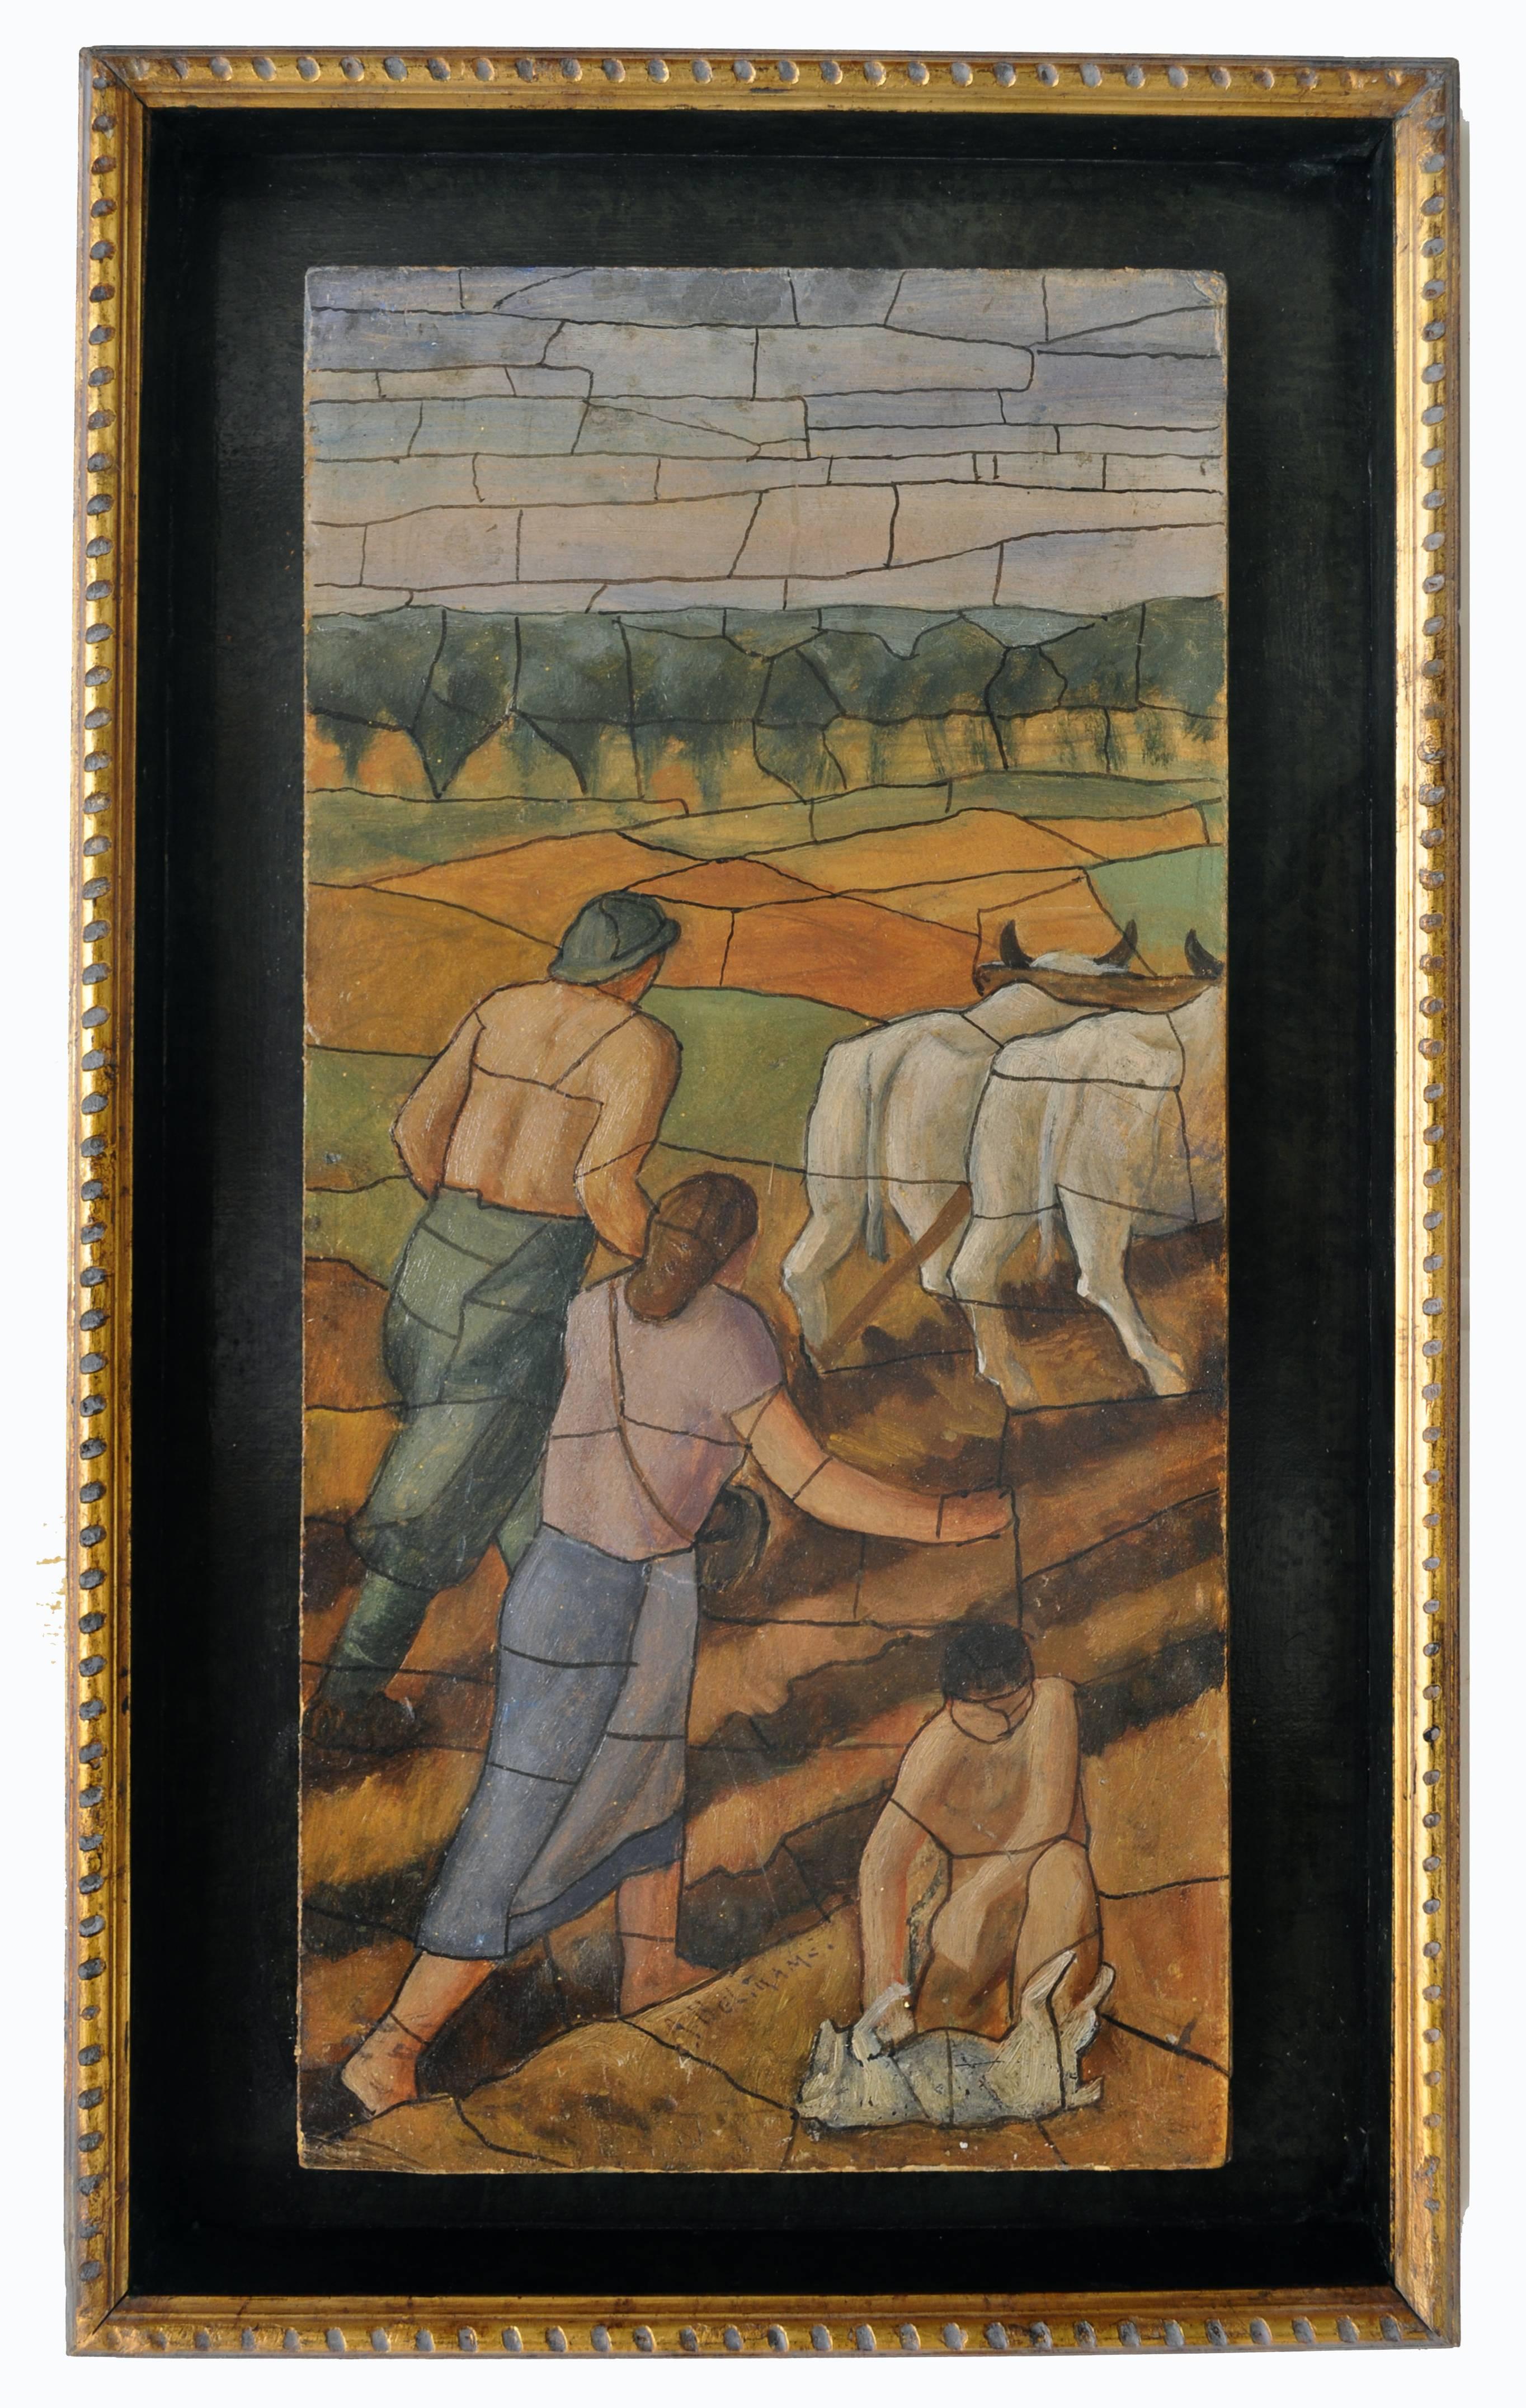 Work in the fields - Achille Beltrame italia - Mixed technique on cardboard cm. 45 x 22 . Mesaure with wooden frame are cm. 54 x 32